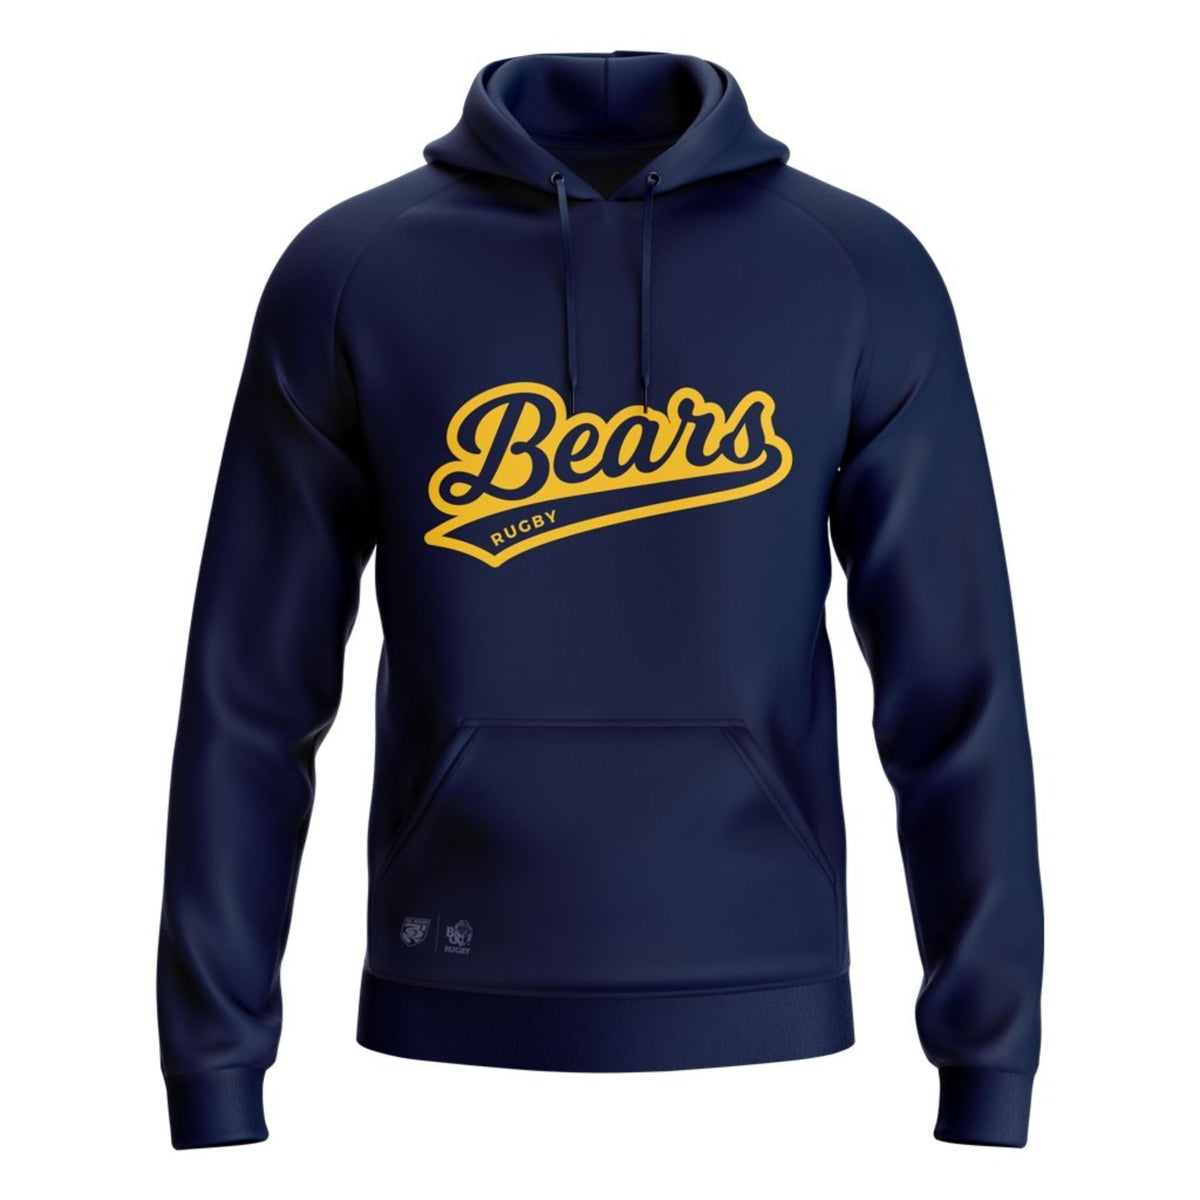 BC Rugby 2021 &quot;Bears&quot; Hoodie - Youth Unisex - www.therugbyshop.com www.therugbyshop.com YOUTH / NAVY / S XIX Brands HOODIES BC Rugby 2021 &quot;Bears&quot; Hoodie - Youth Unisex